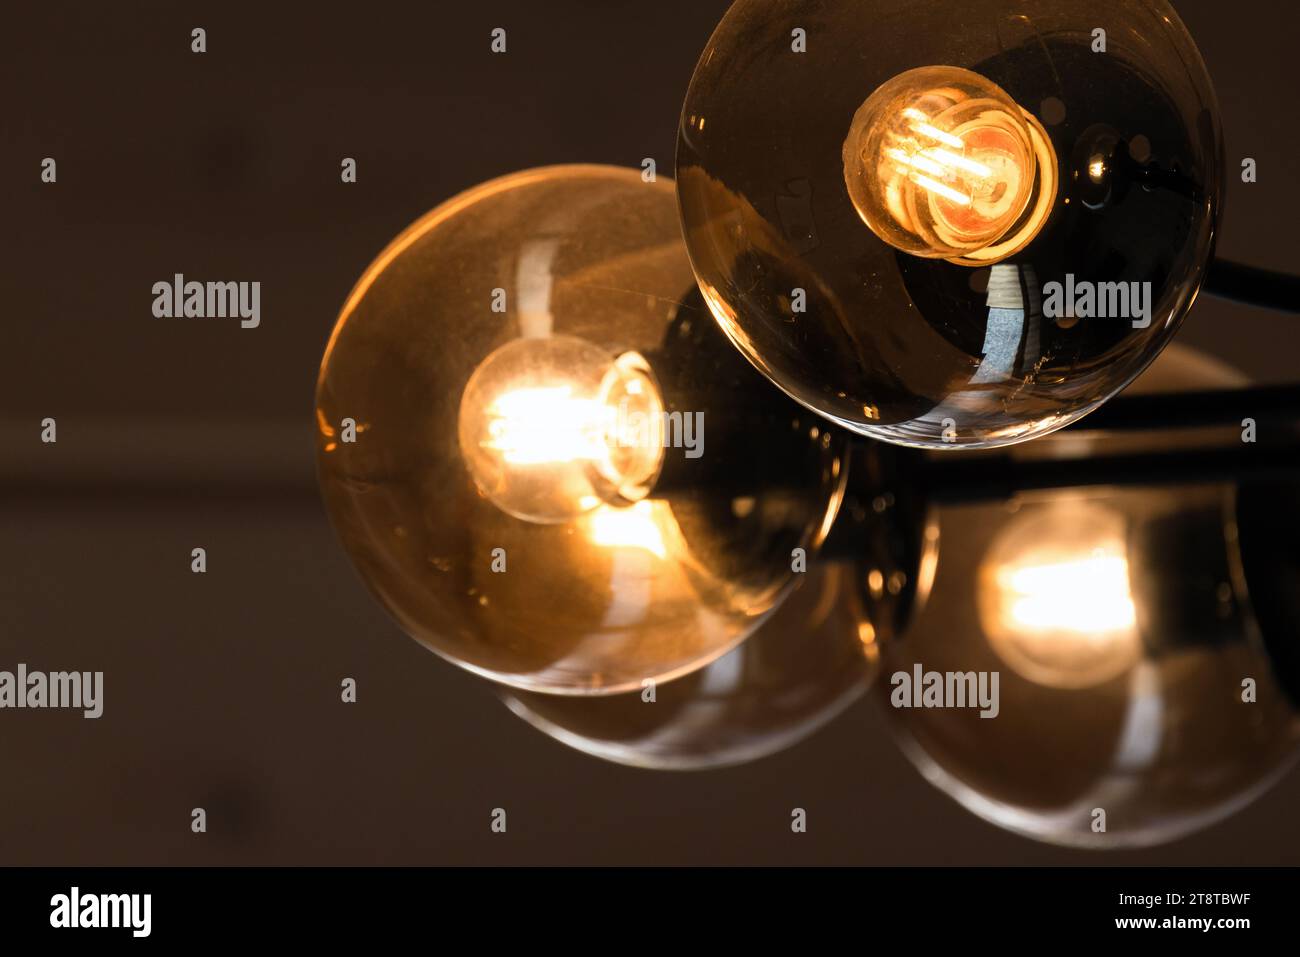 Tungsten lamps glow in round glass lampshades, modern chandelier close-up view Stock Photo